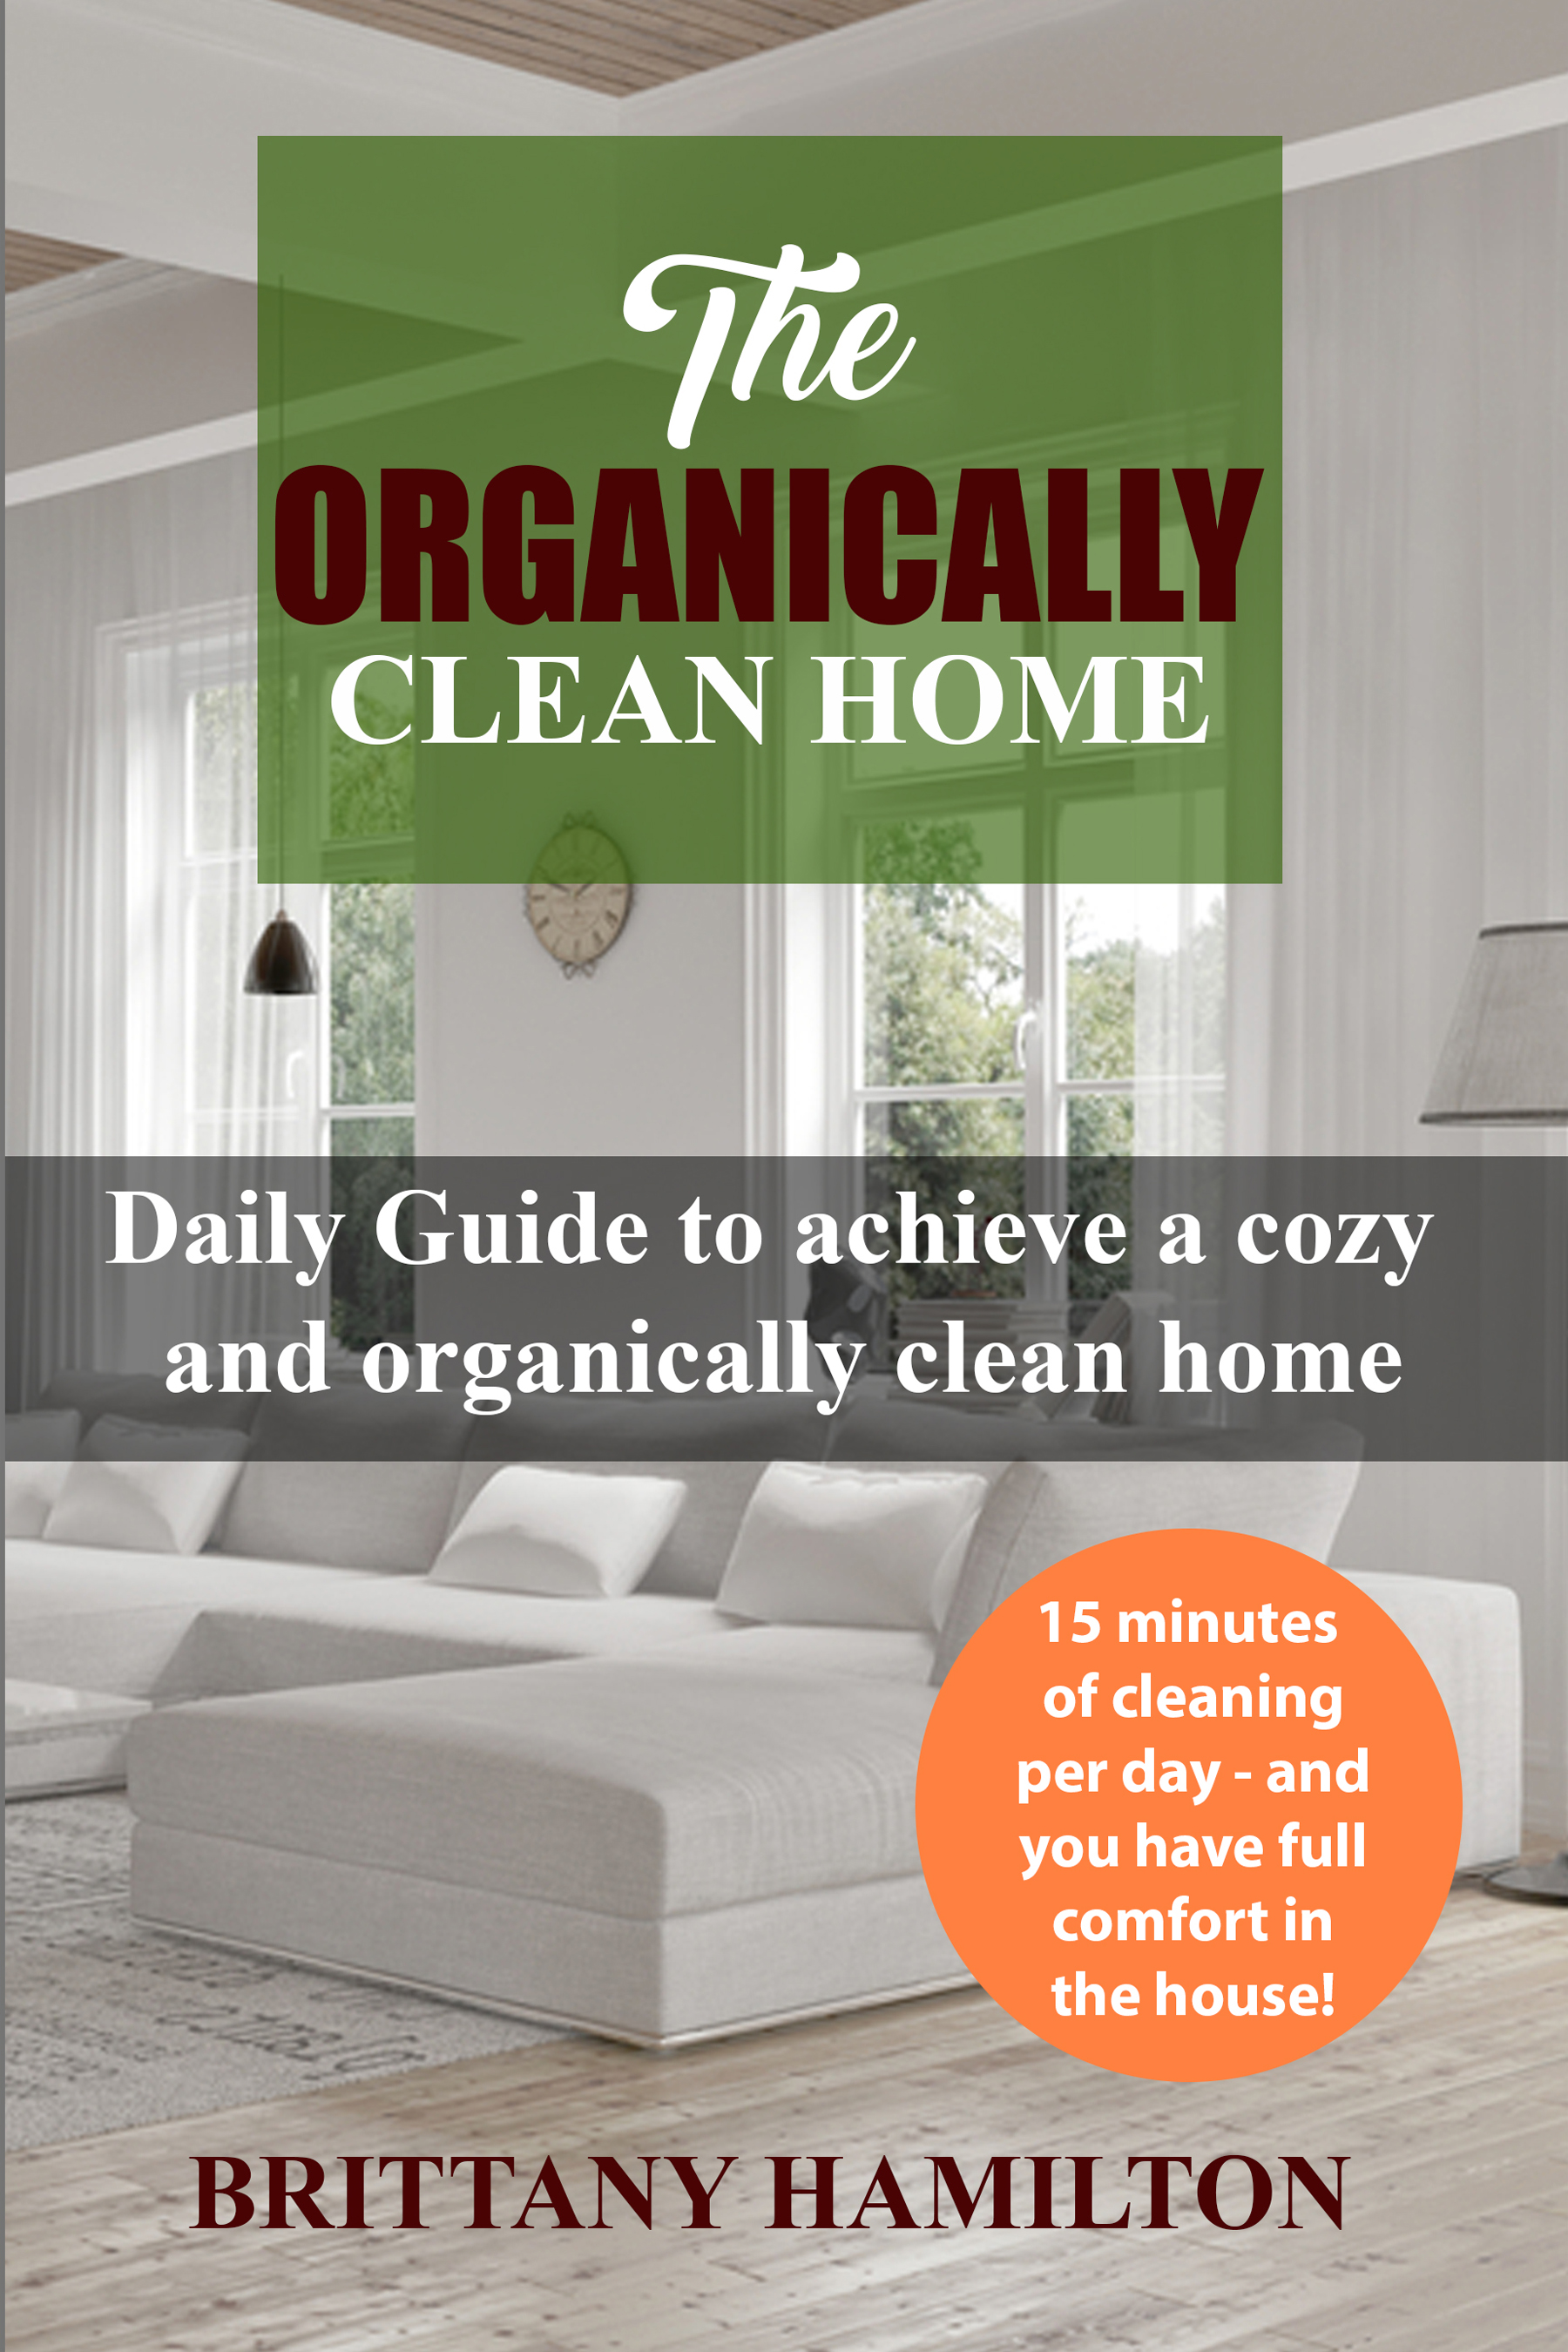 FREE: The Organically Clean Home by Brittany Hamilton